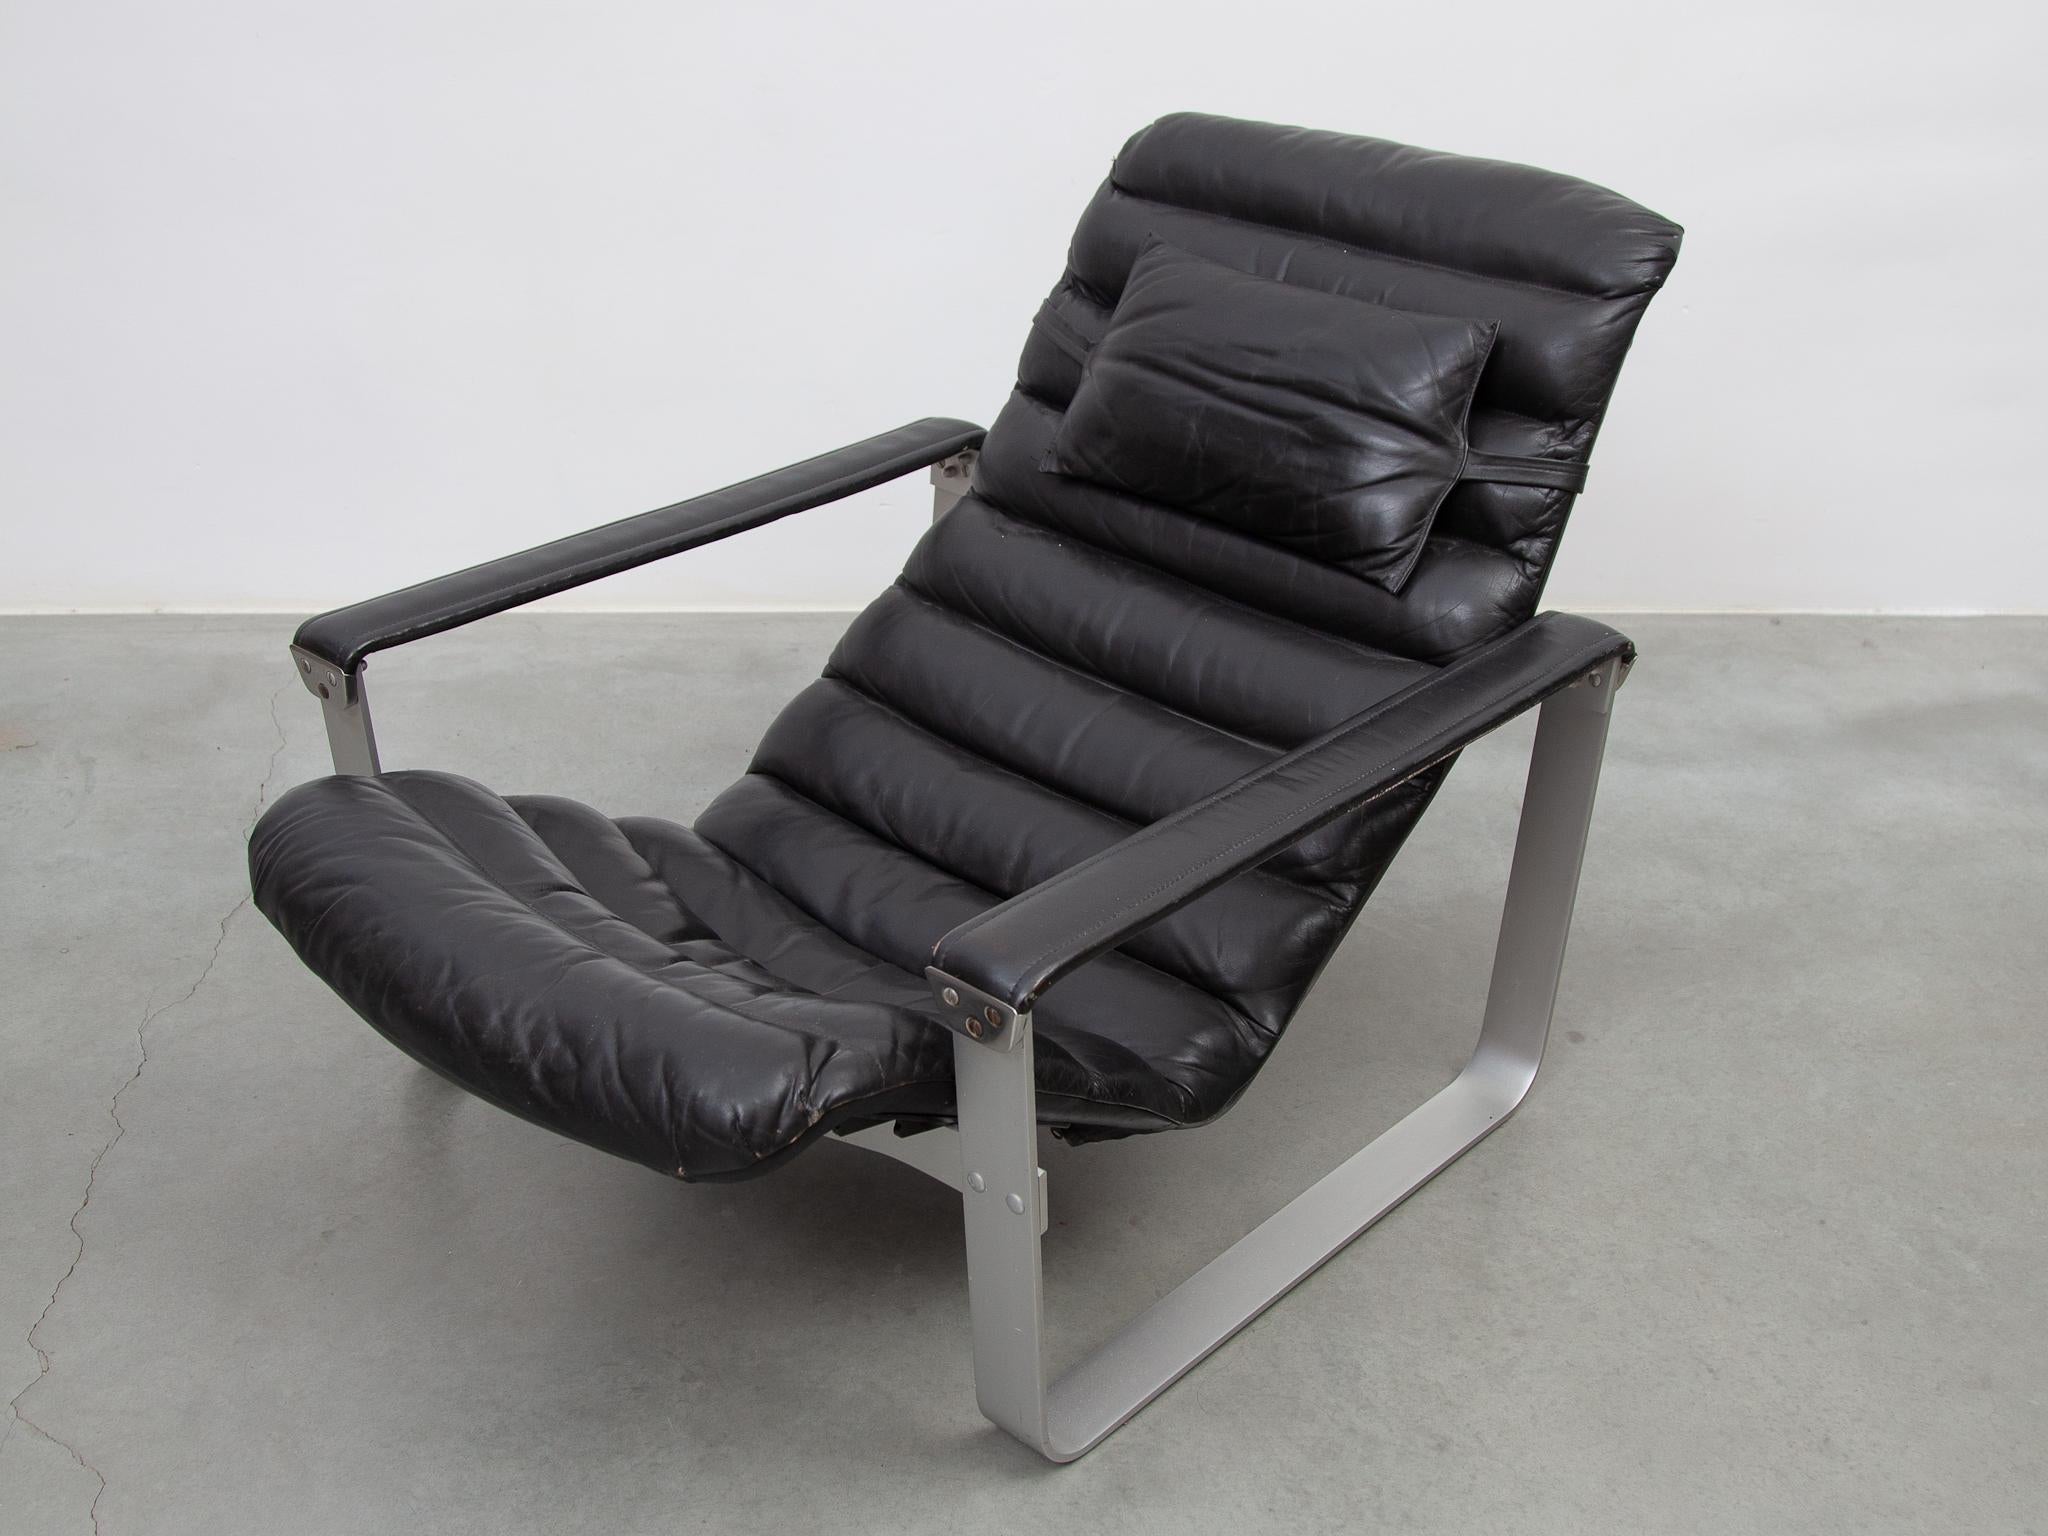 Pulkka Lounge Chair designed by Ilmari Lappalainen by ASKO, Finland, 1968 For Sale 3